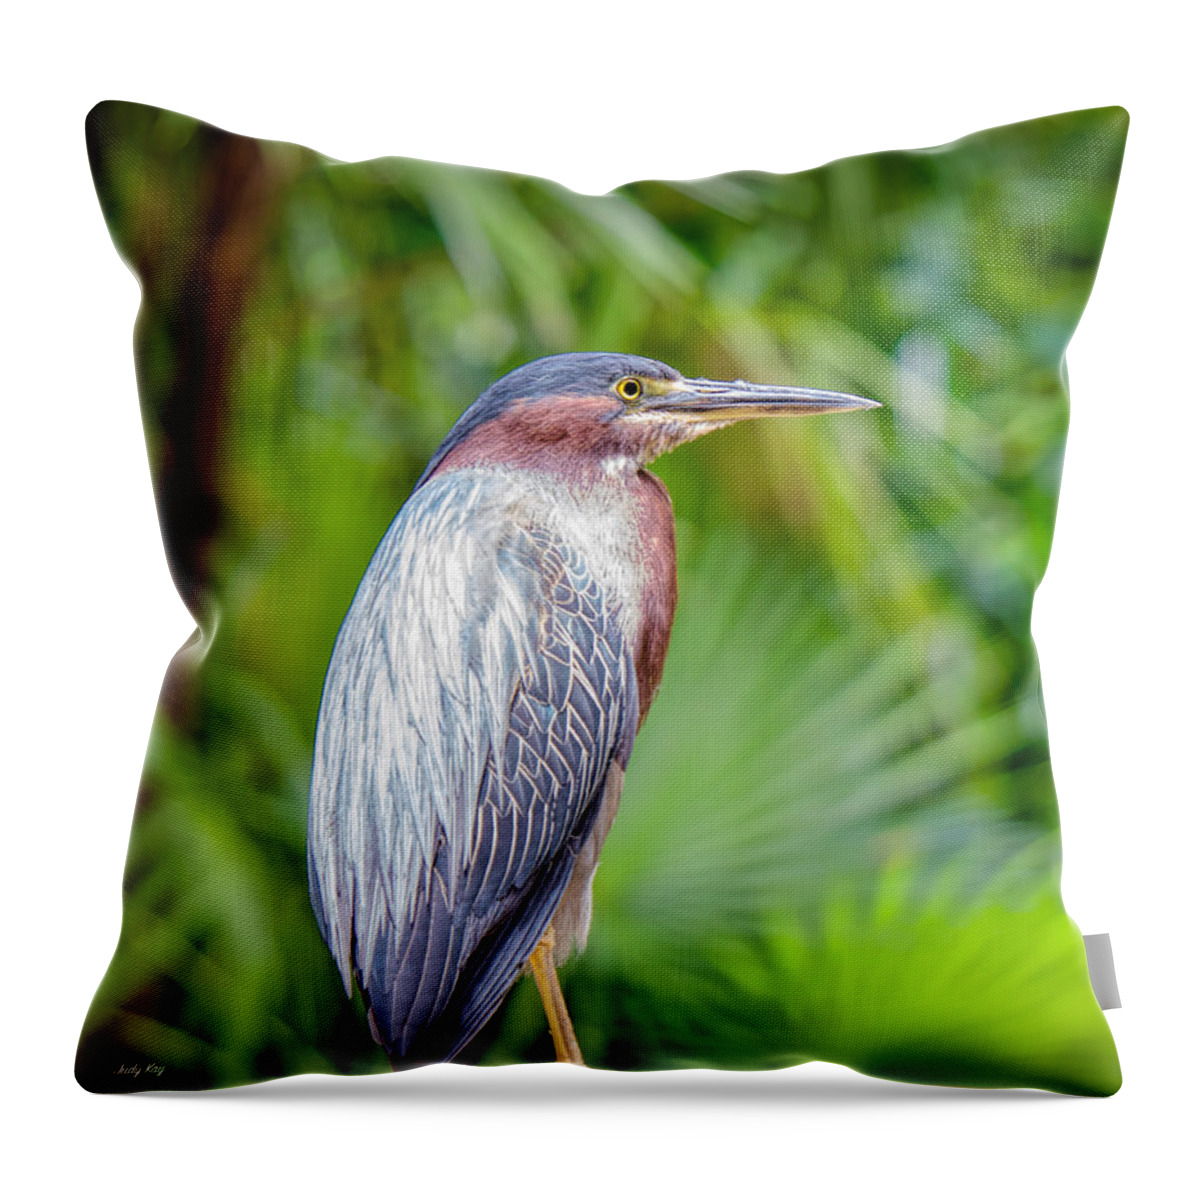 Birds Throw Pillow featuring the photograph The Green Heron by Judy Kay